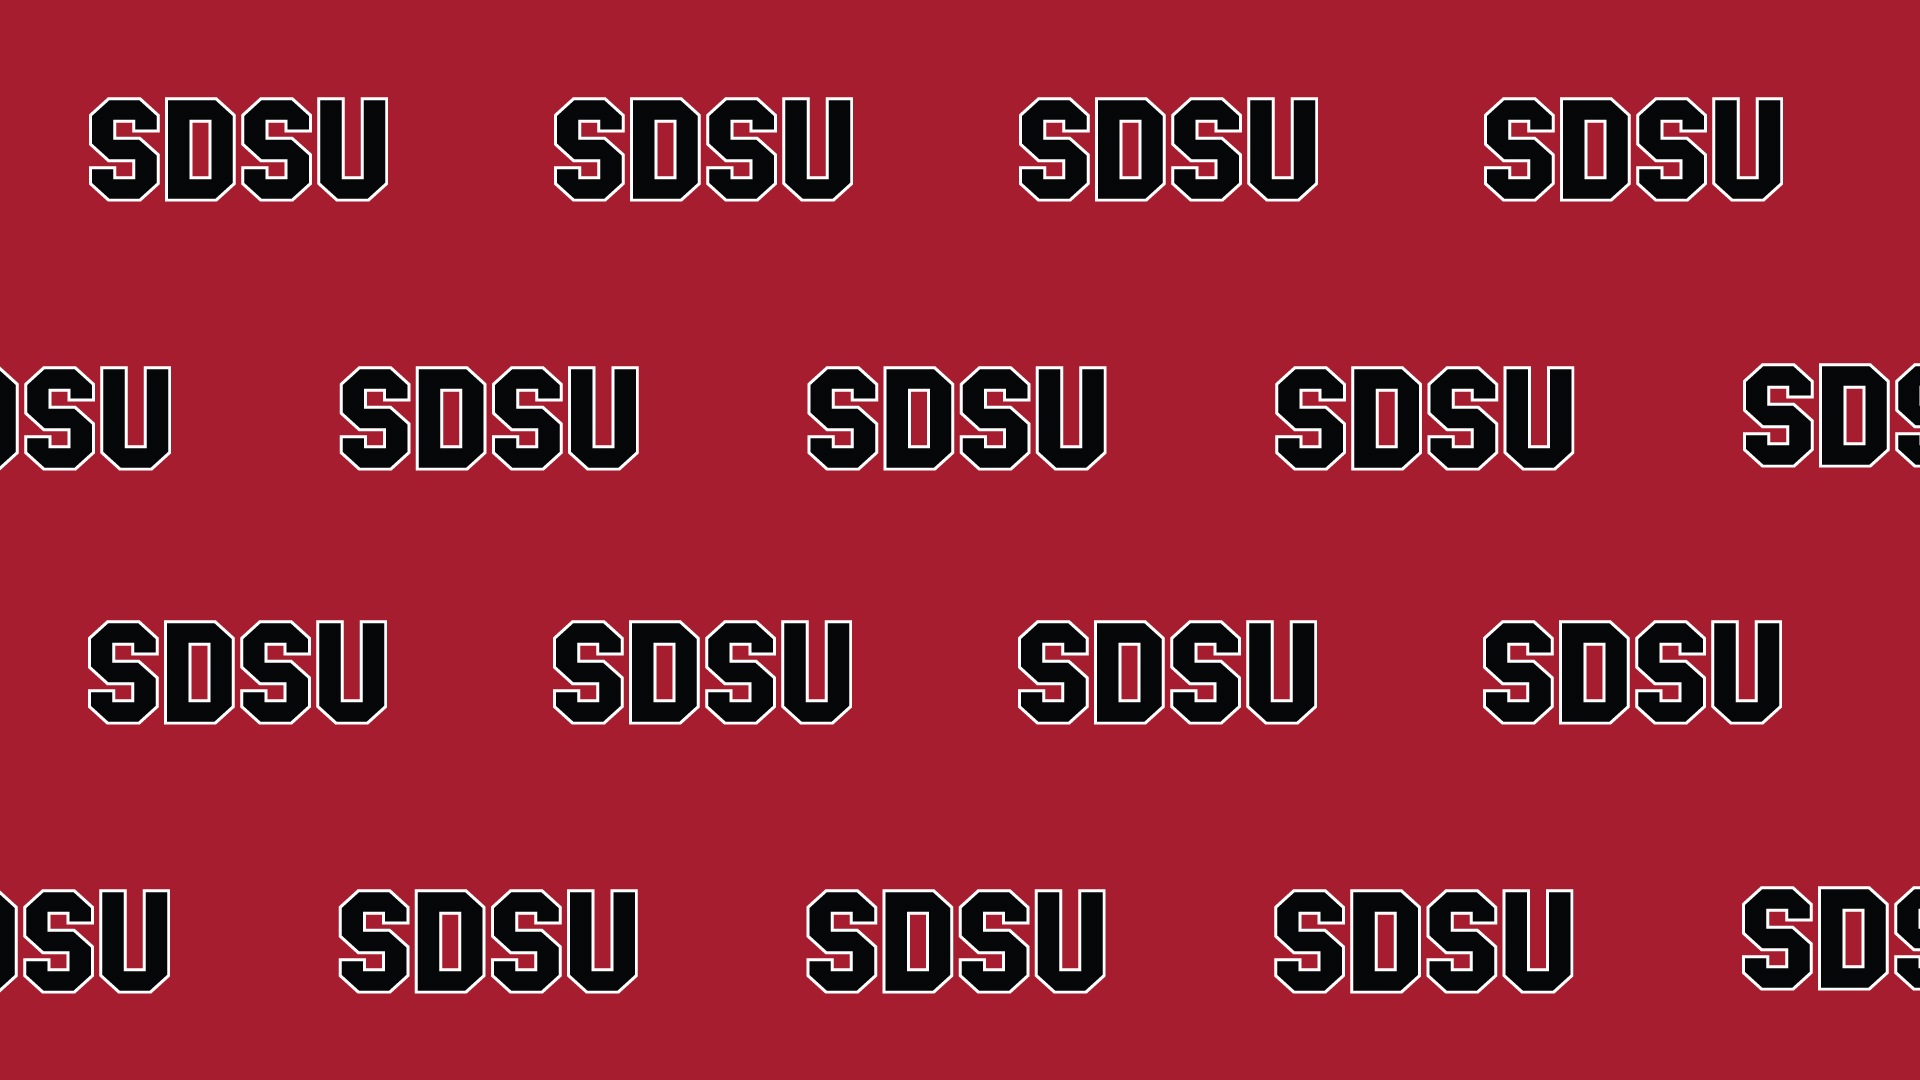 SDSU in block letters on red background